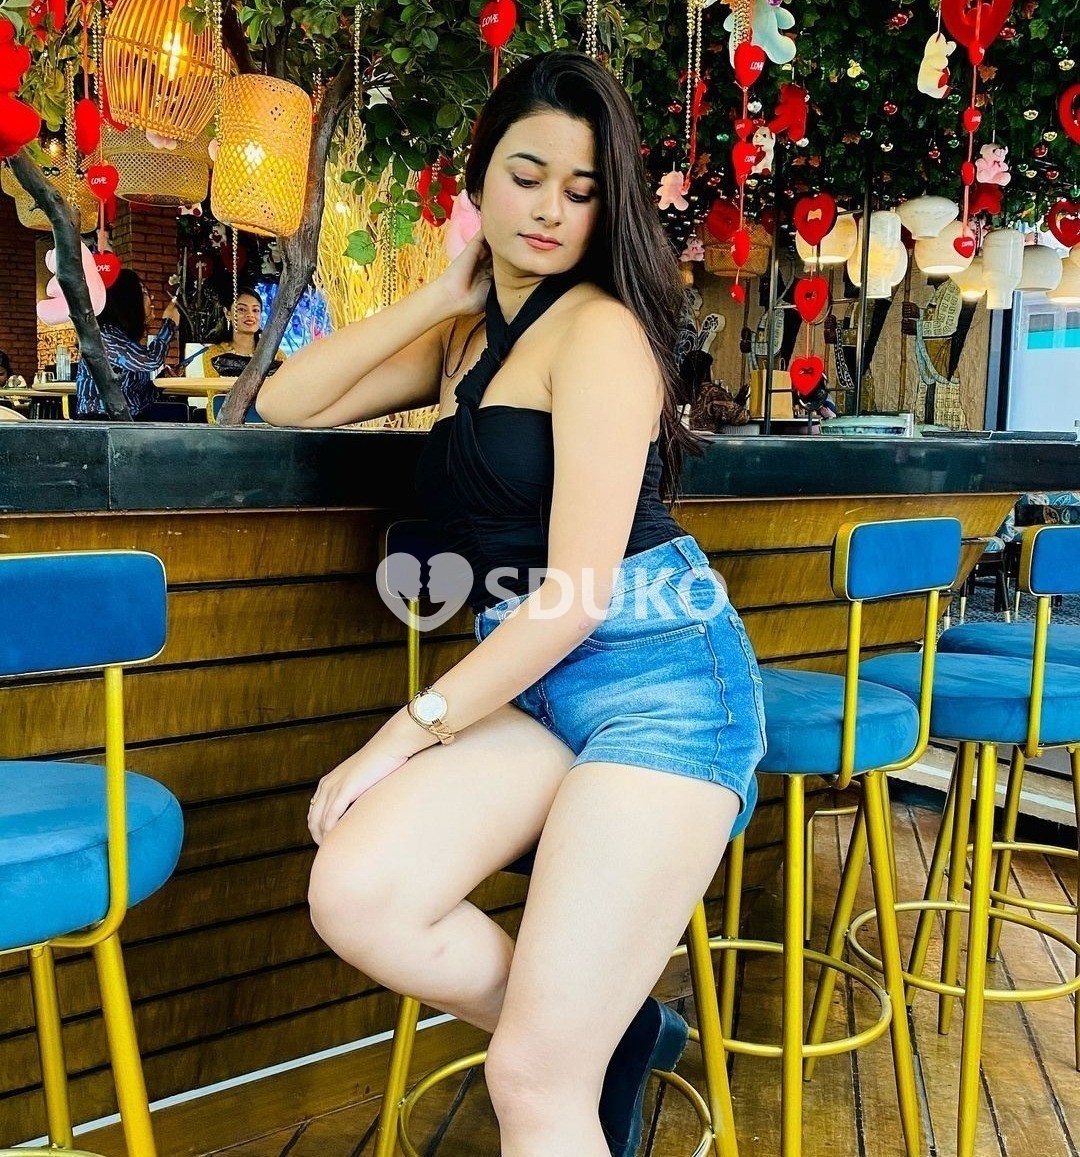 Delhi all area Genuine ⭐⭐ service 🔥100% 💫SAFE AND 💋SECURE 💋⭐💫TODAY LOW PRICE UNLIMITED ENJOY HOT CO